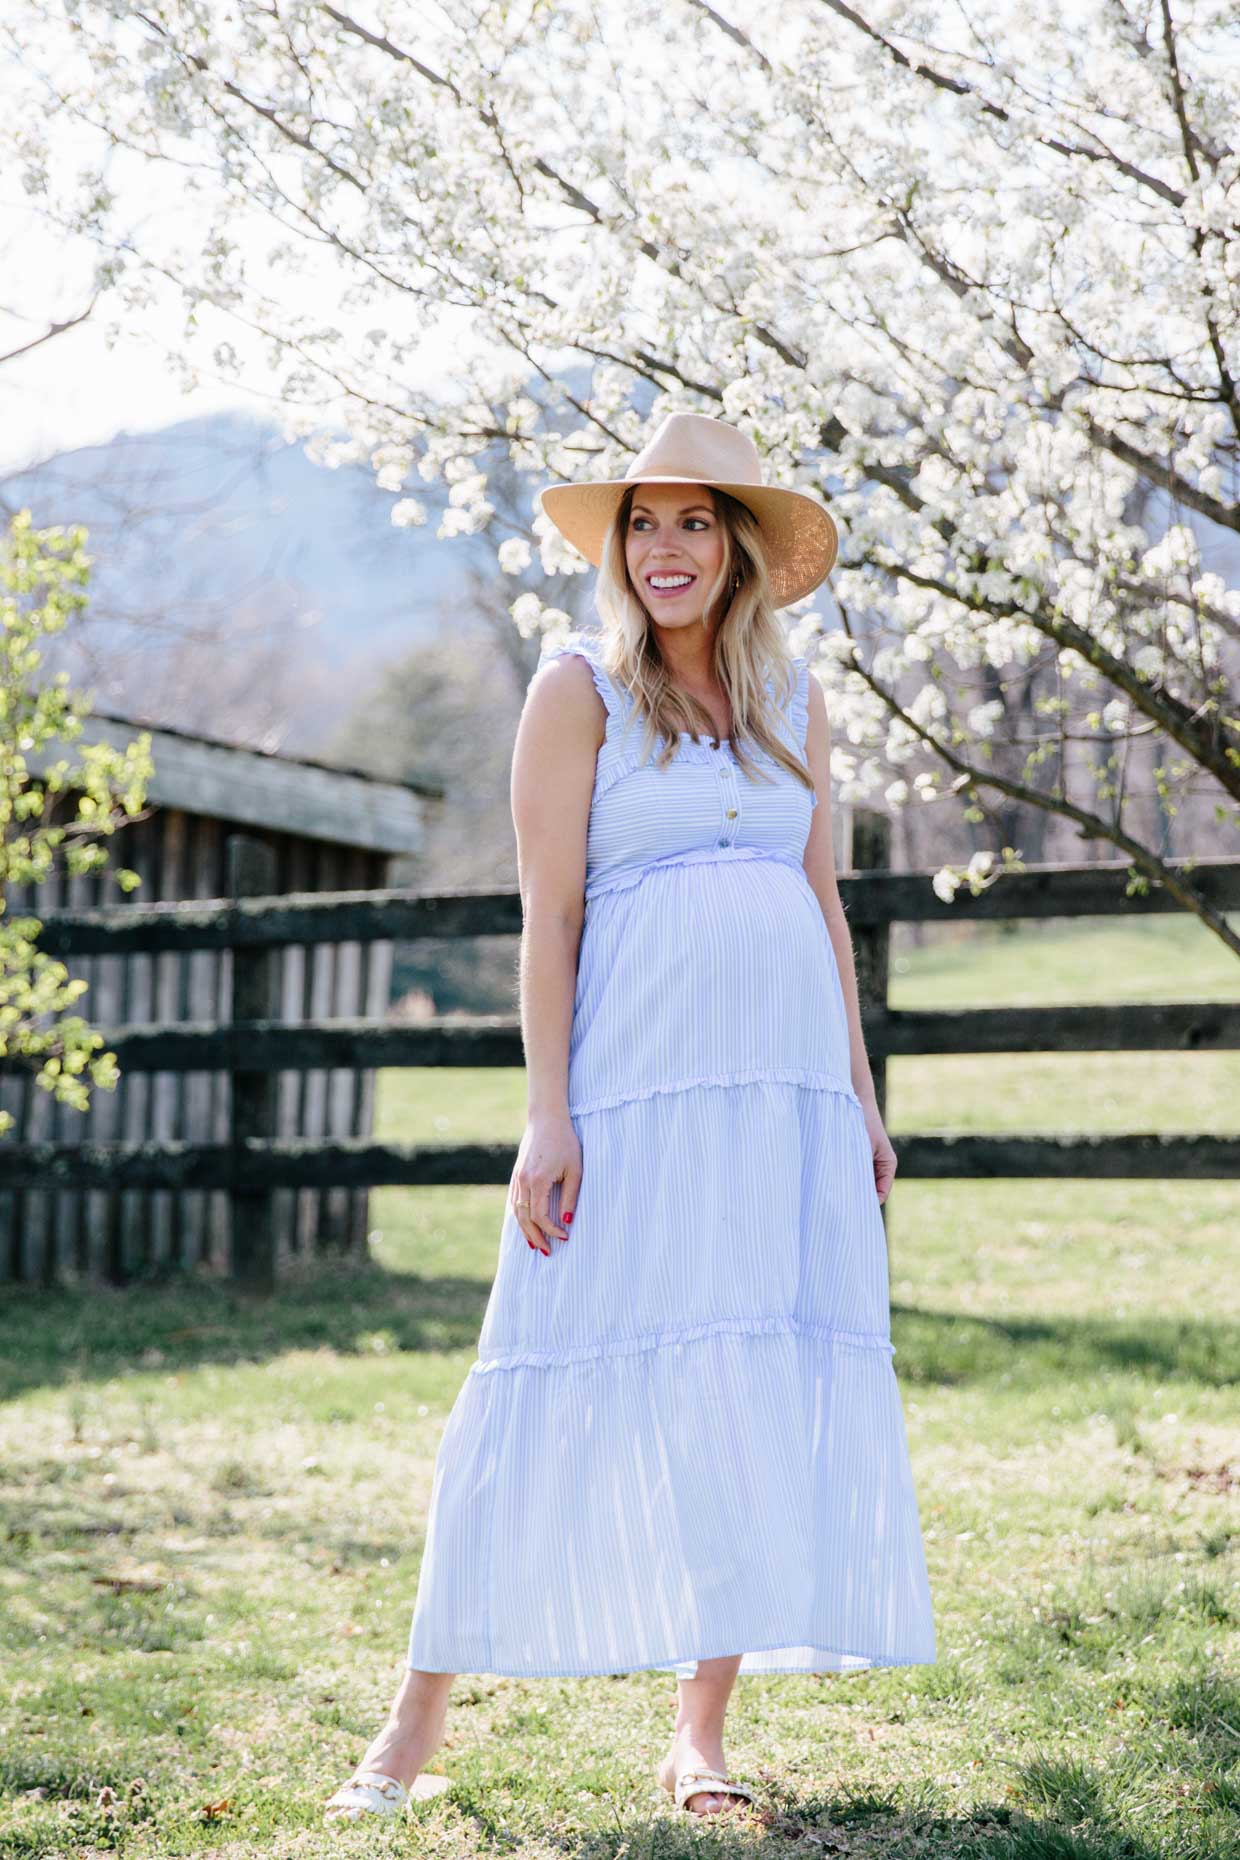 Spring Blooms & A New Sustainable Maternity Brand I'm Loving - Meagan's Moda